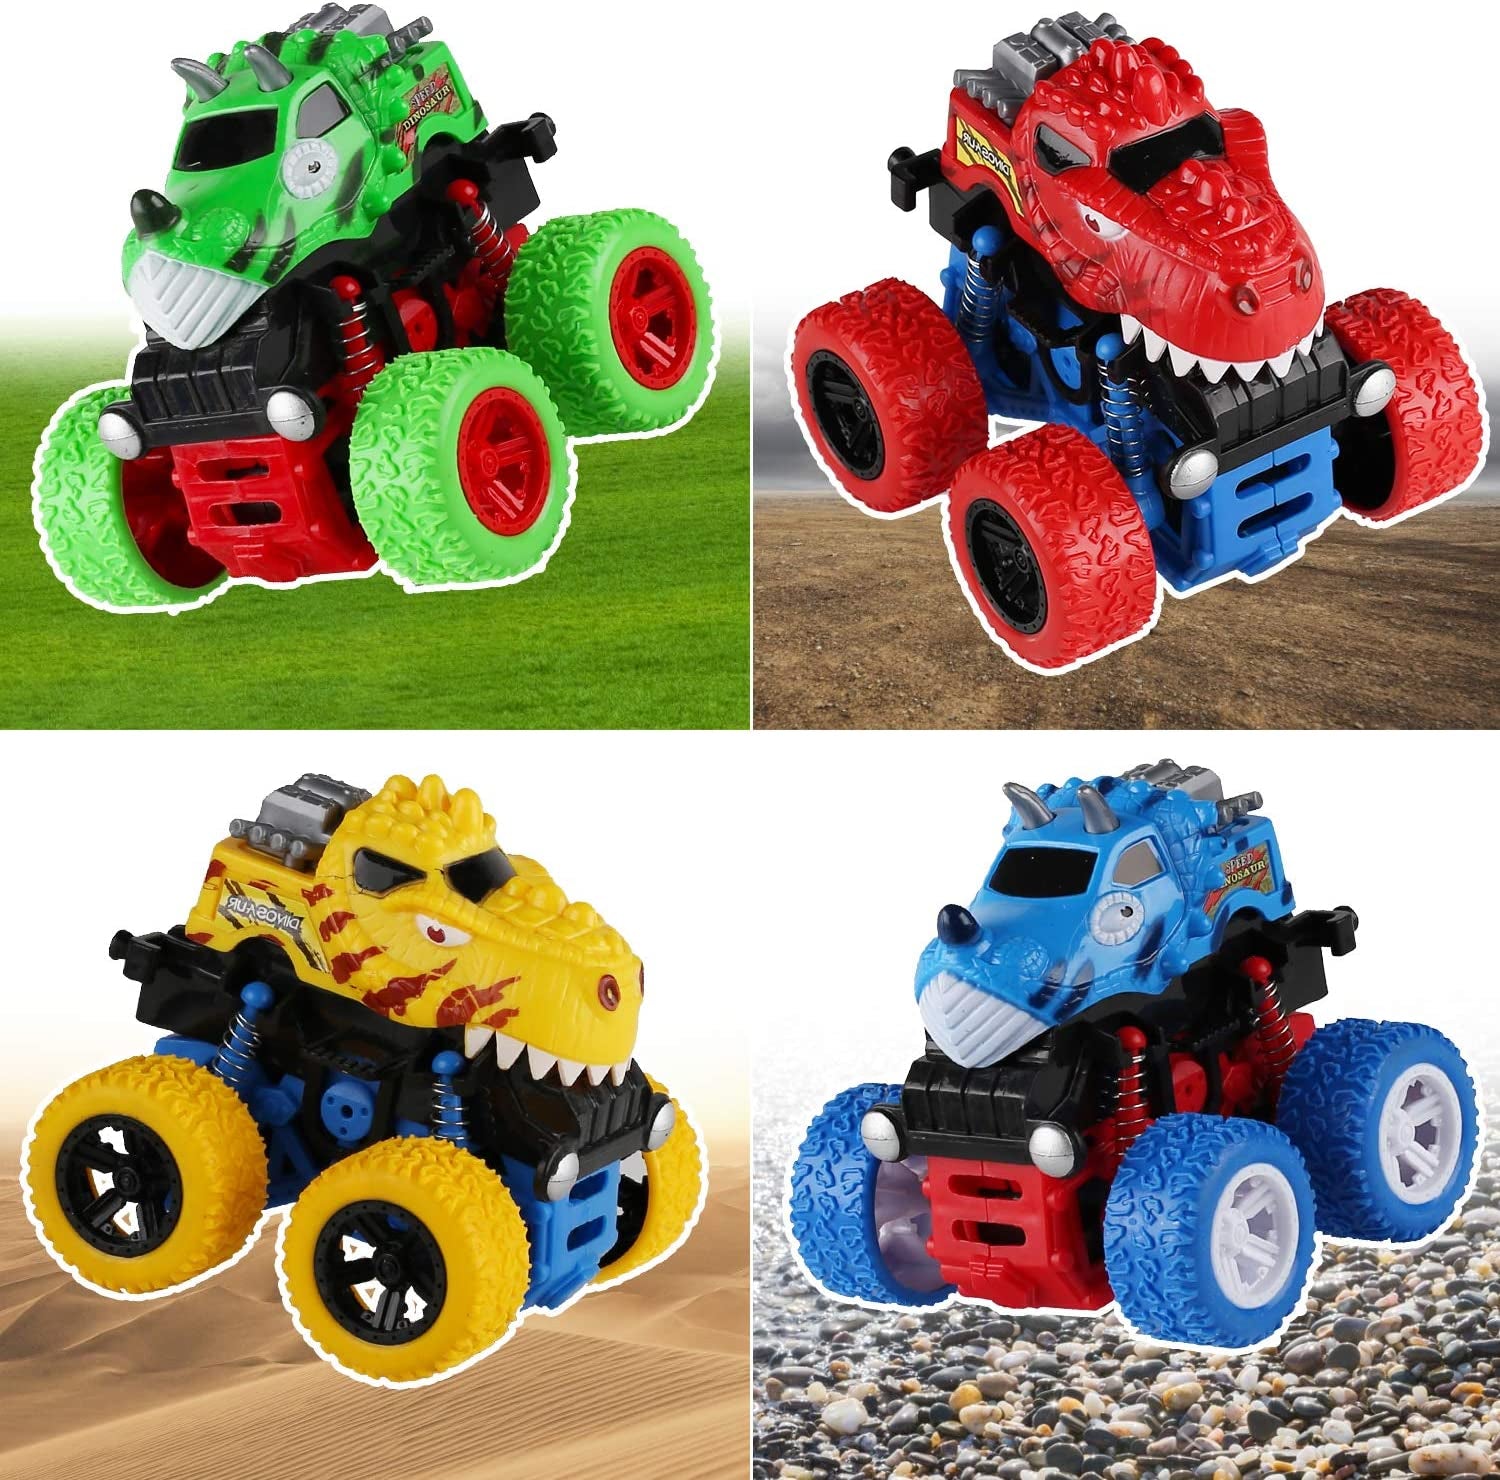 Dinosaur Toys Cars for Boys - 4 Pack Friction Powered Push and Go Monster Trucks Pull Back Vehicles for Kids Ages 3 4 5 6 7 Year Old - Christmas Birthday Gift Dino Toys for Toddlers